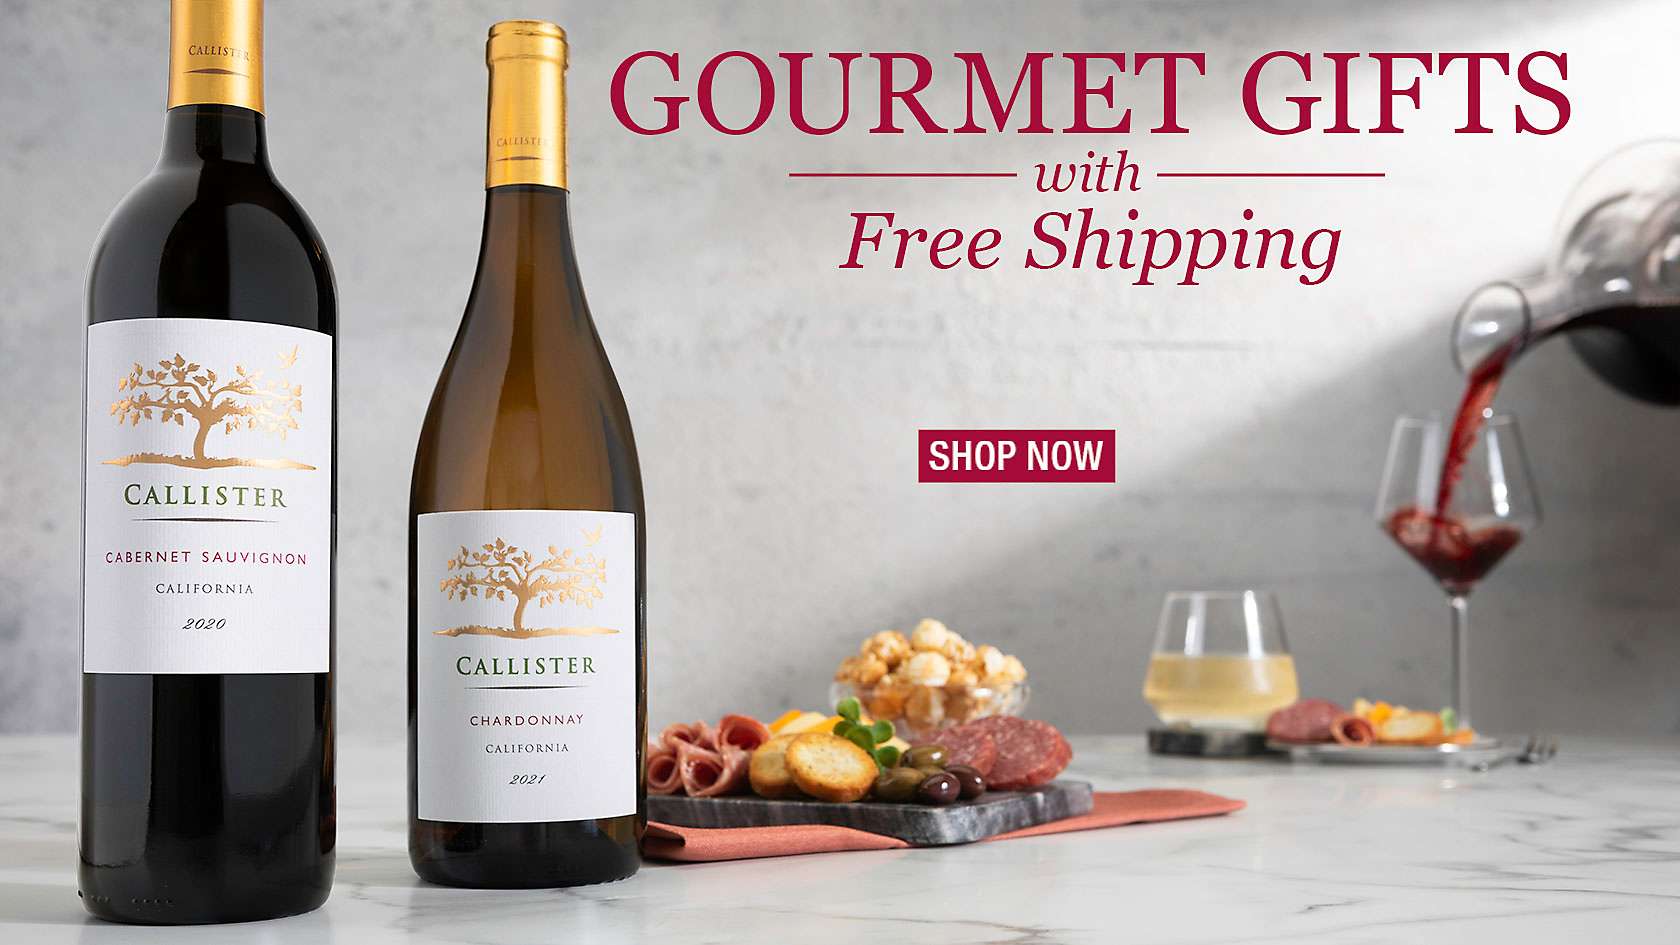 Gourmet gifts with free shipping